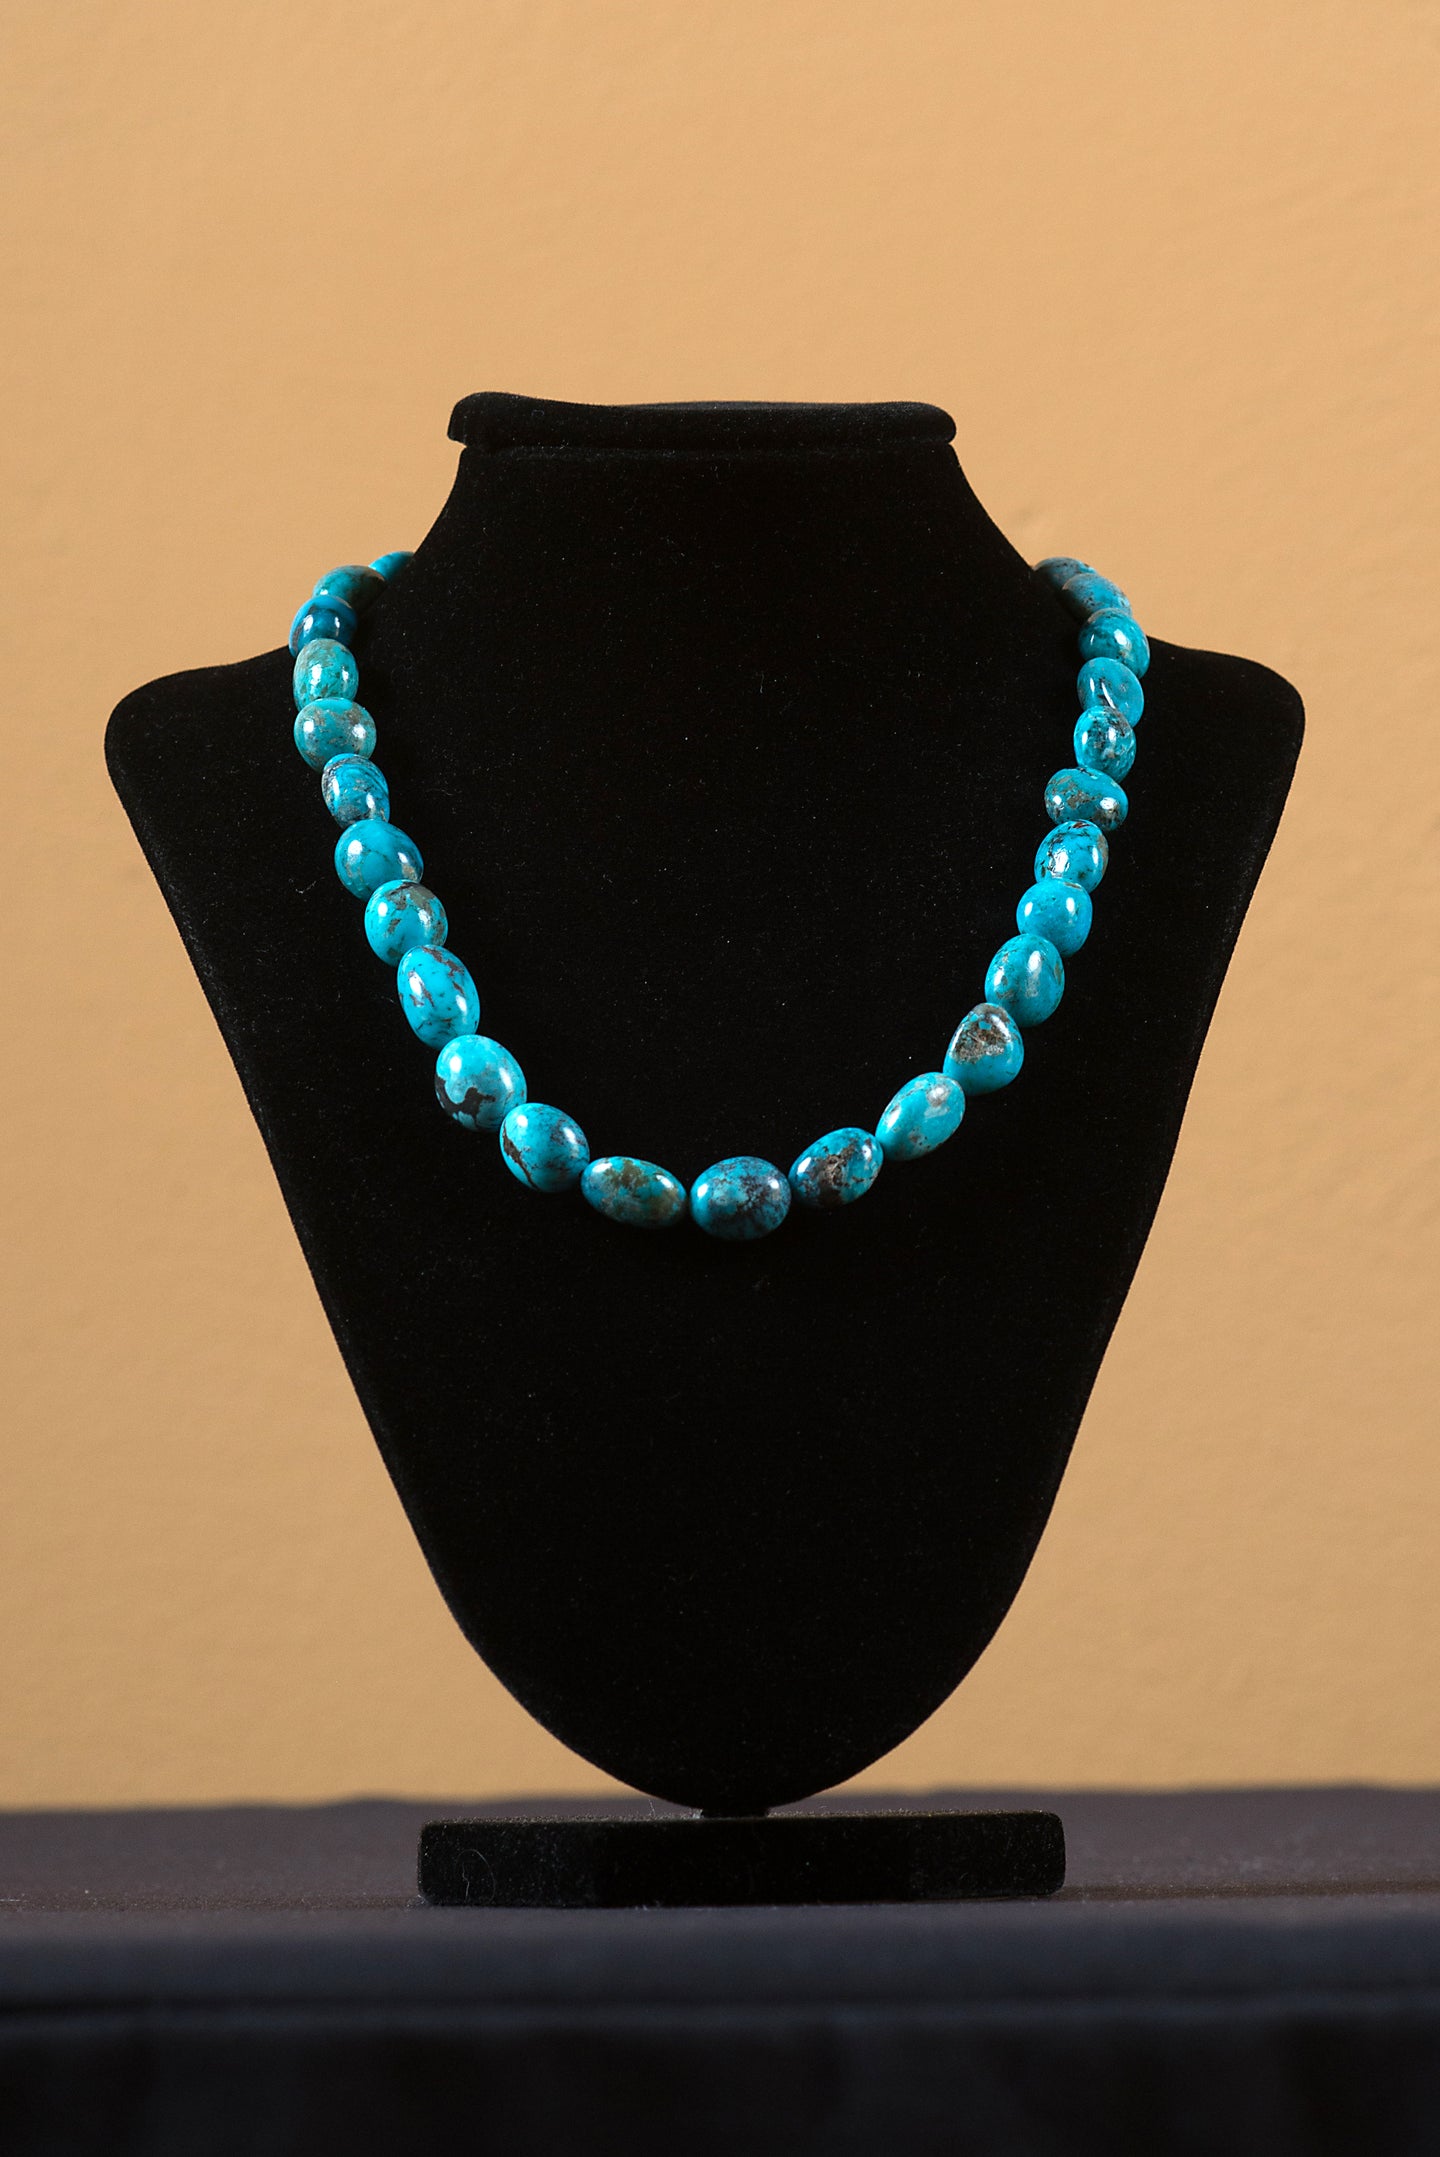 Necklace - Turquoise, Sterling Silver